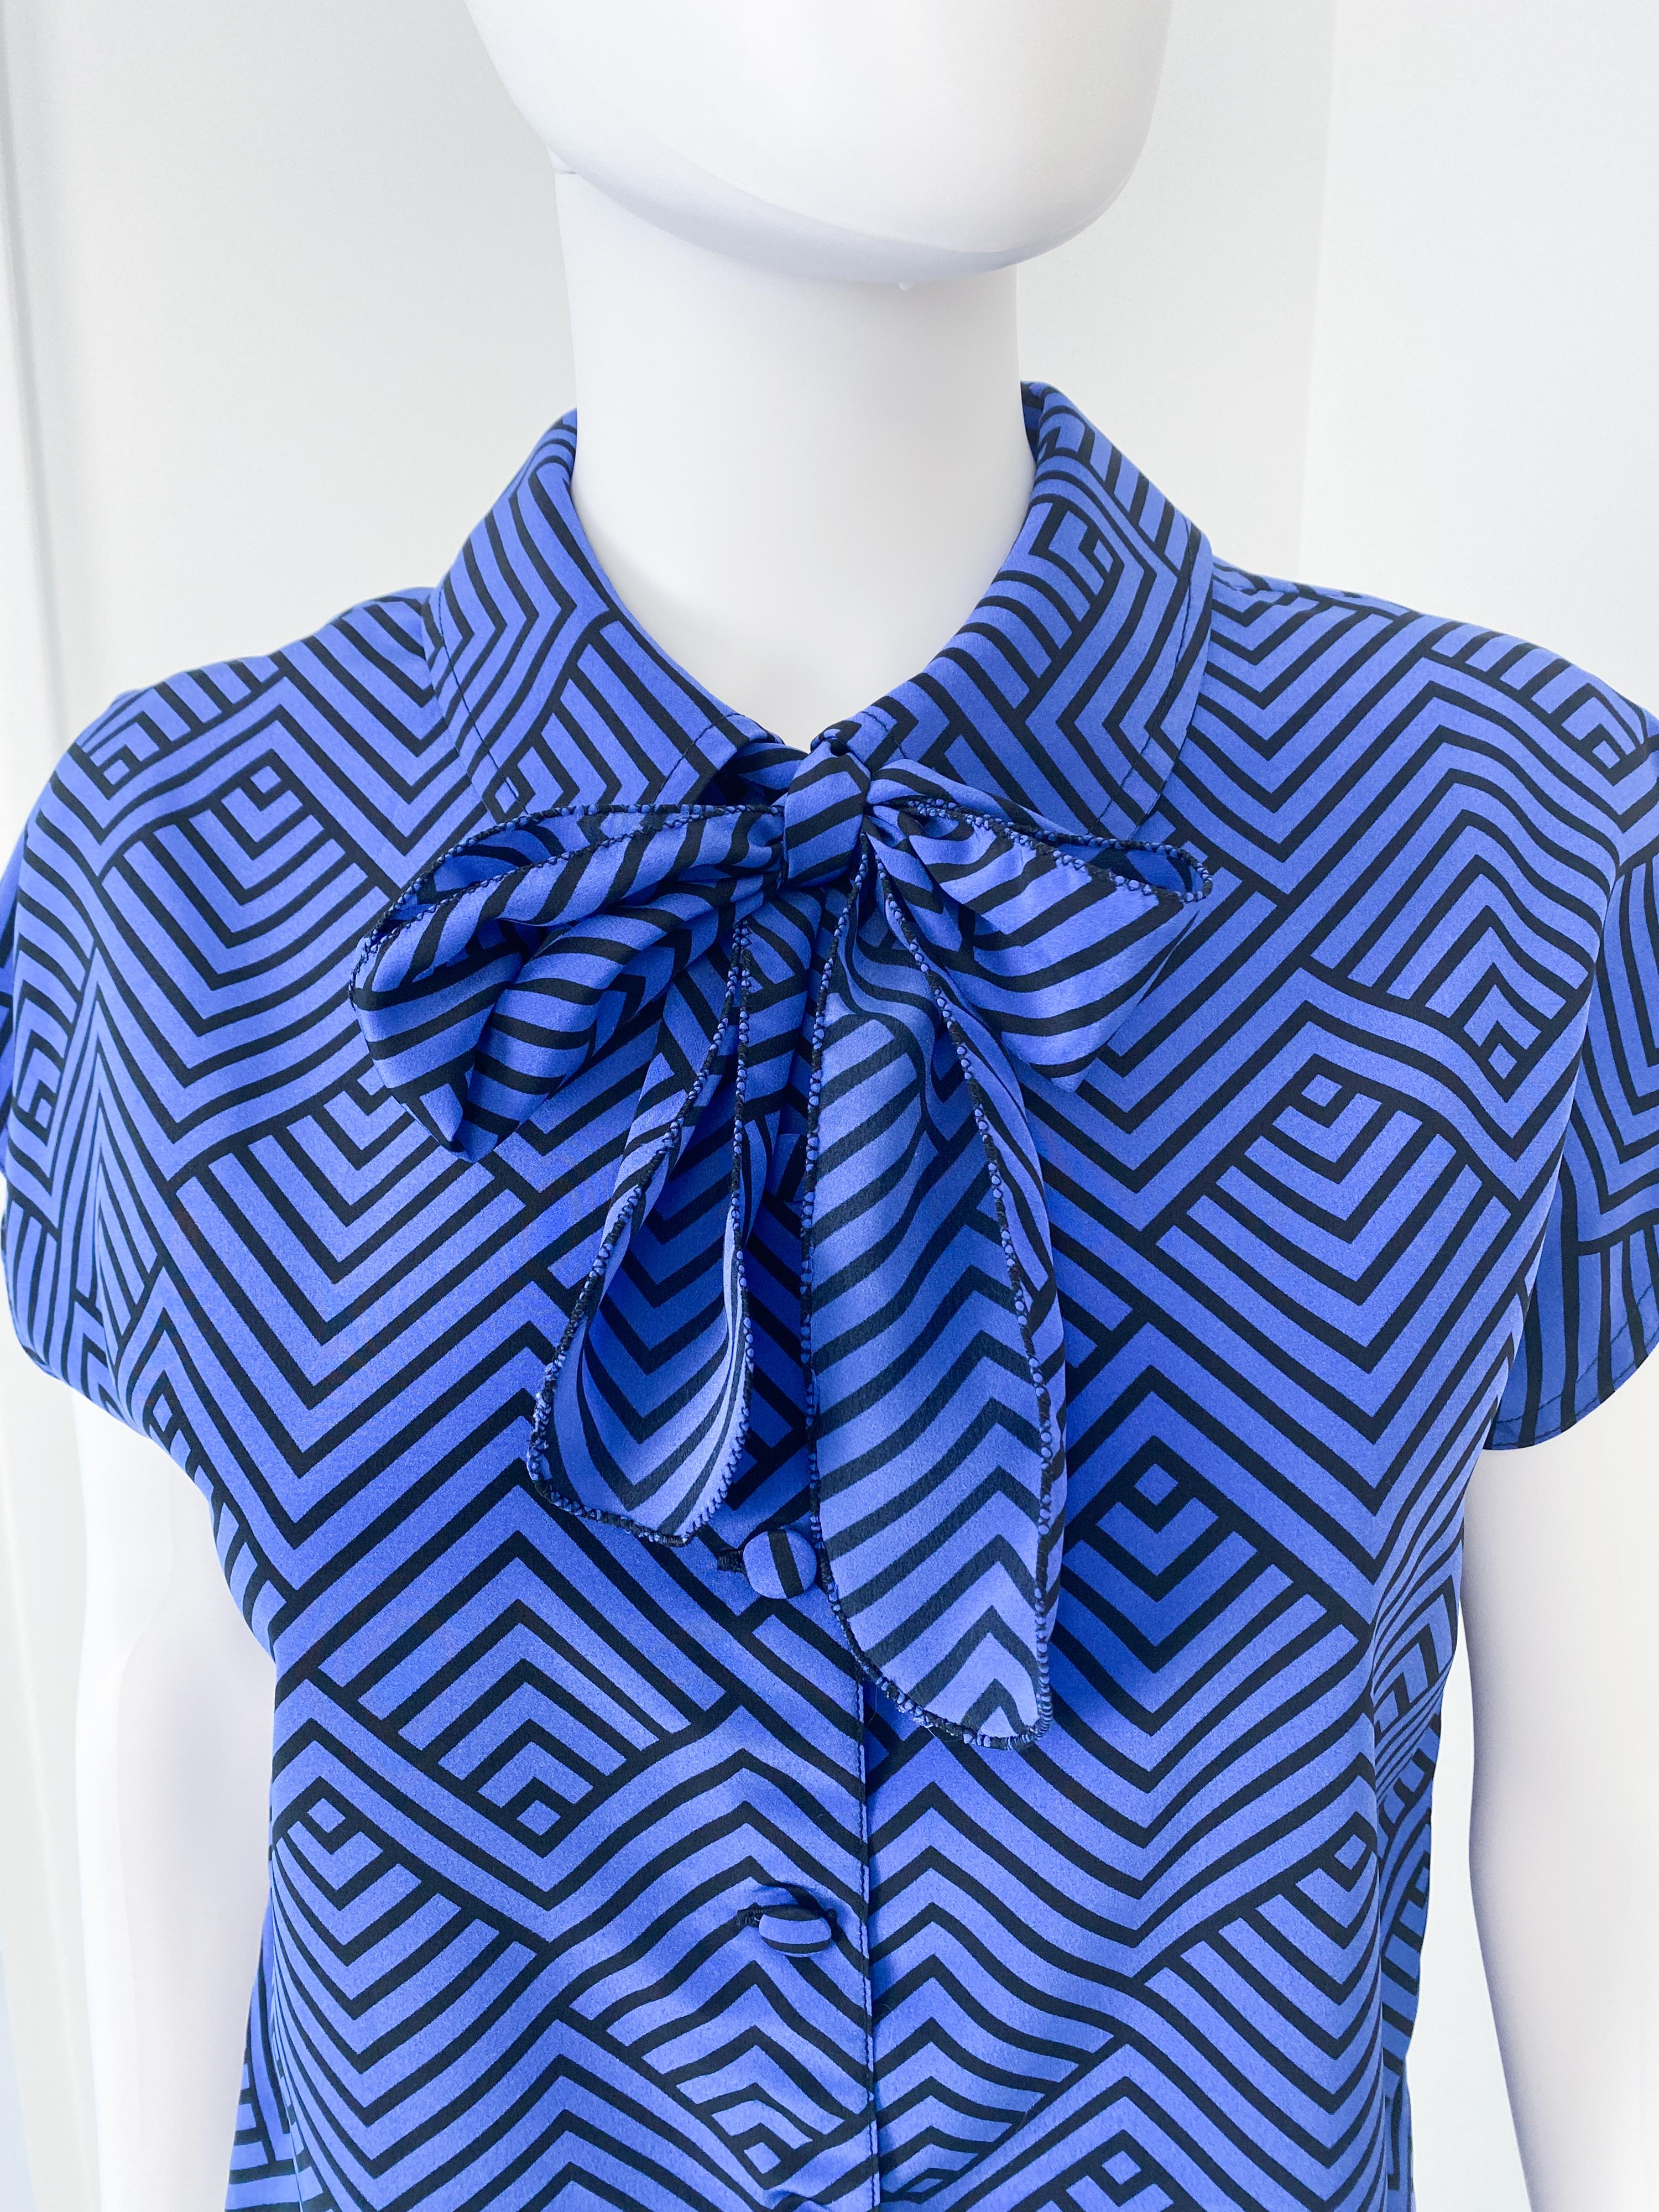 Vintage 1980s Silky Polyester Blouse Top Black and Blue ZigZag Size 8/10 For Sale 2